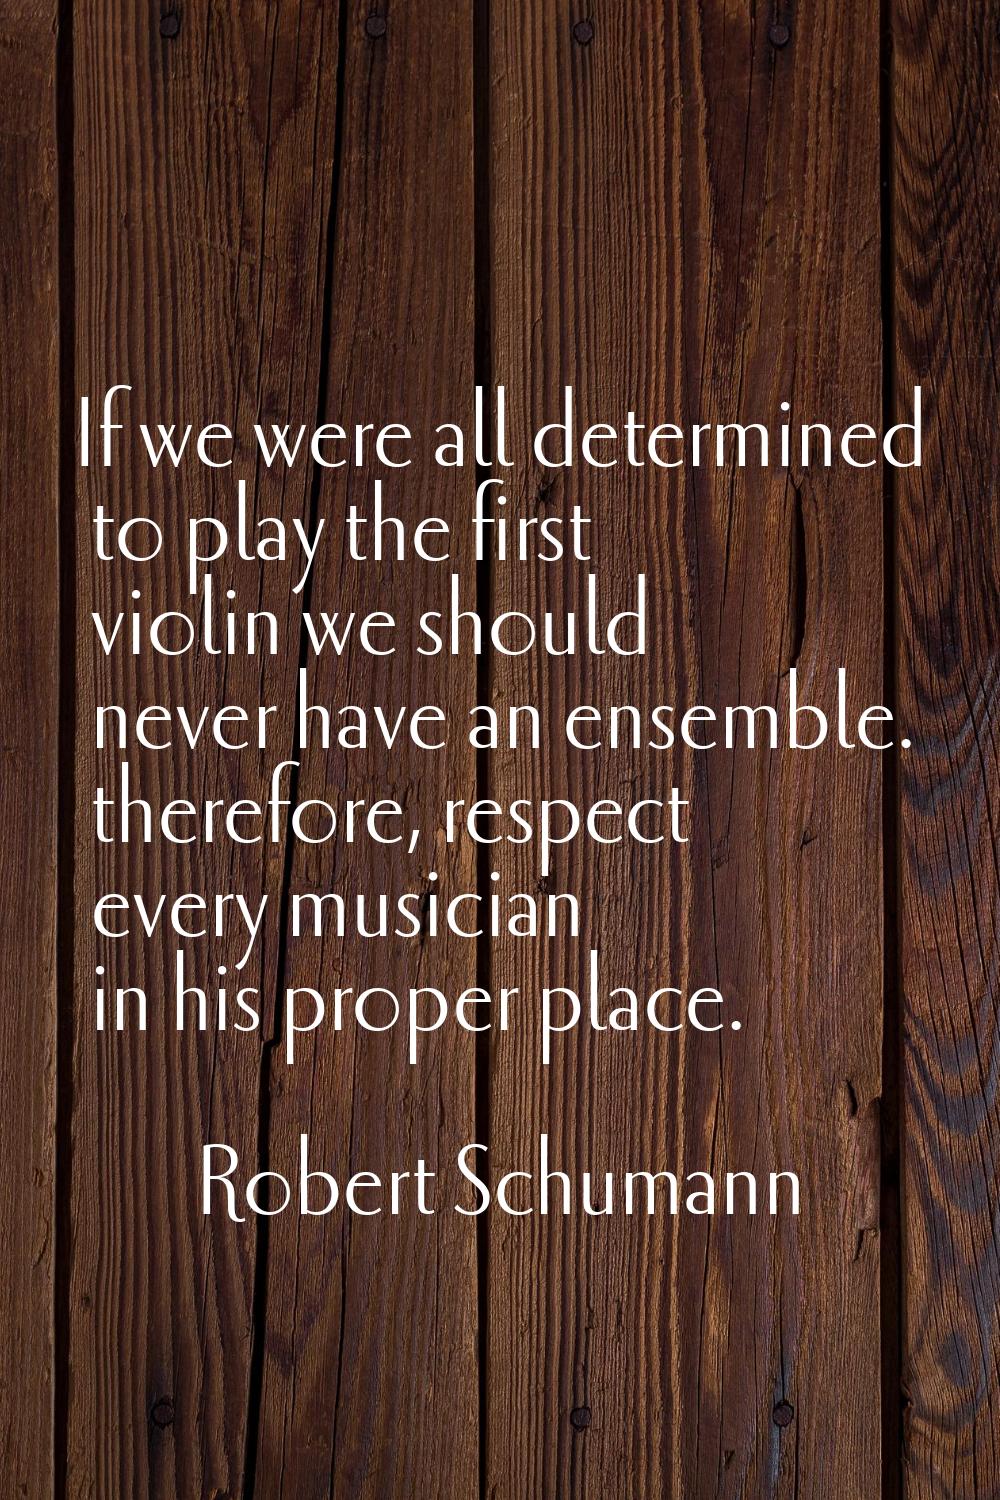 If we were all determined to play the first violin we should never have an ensemble. therefore, res